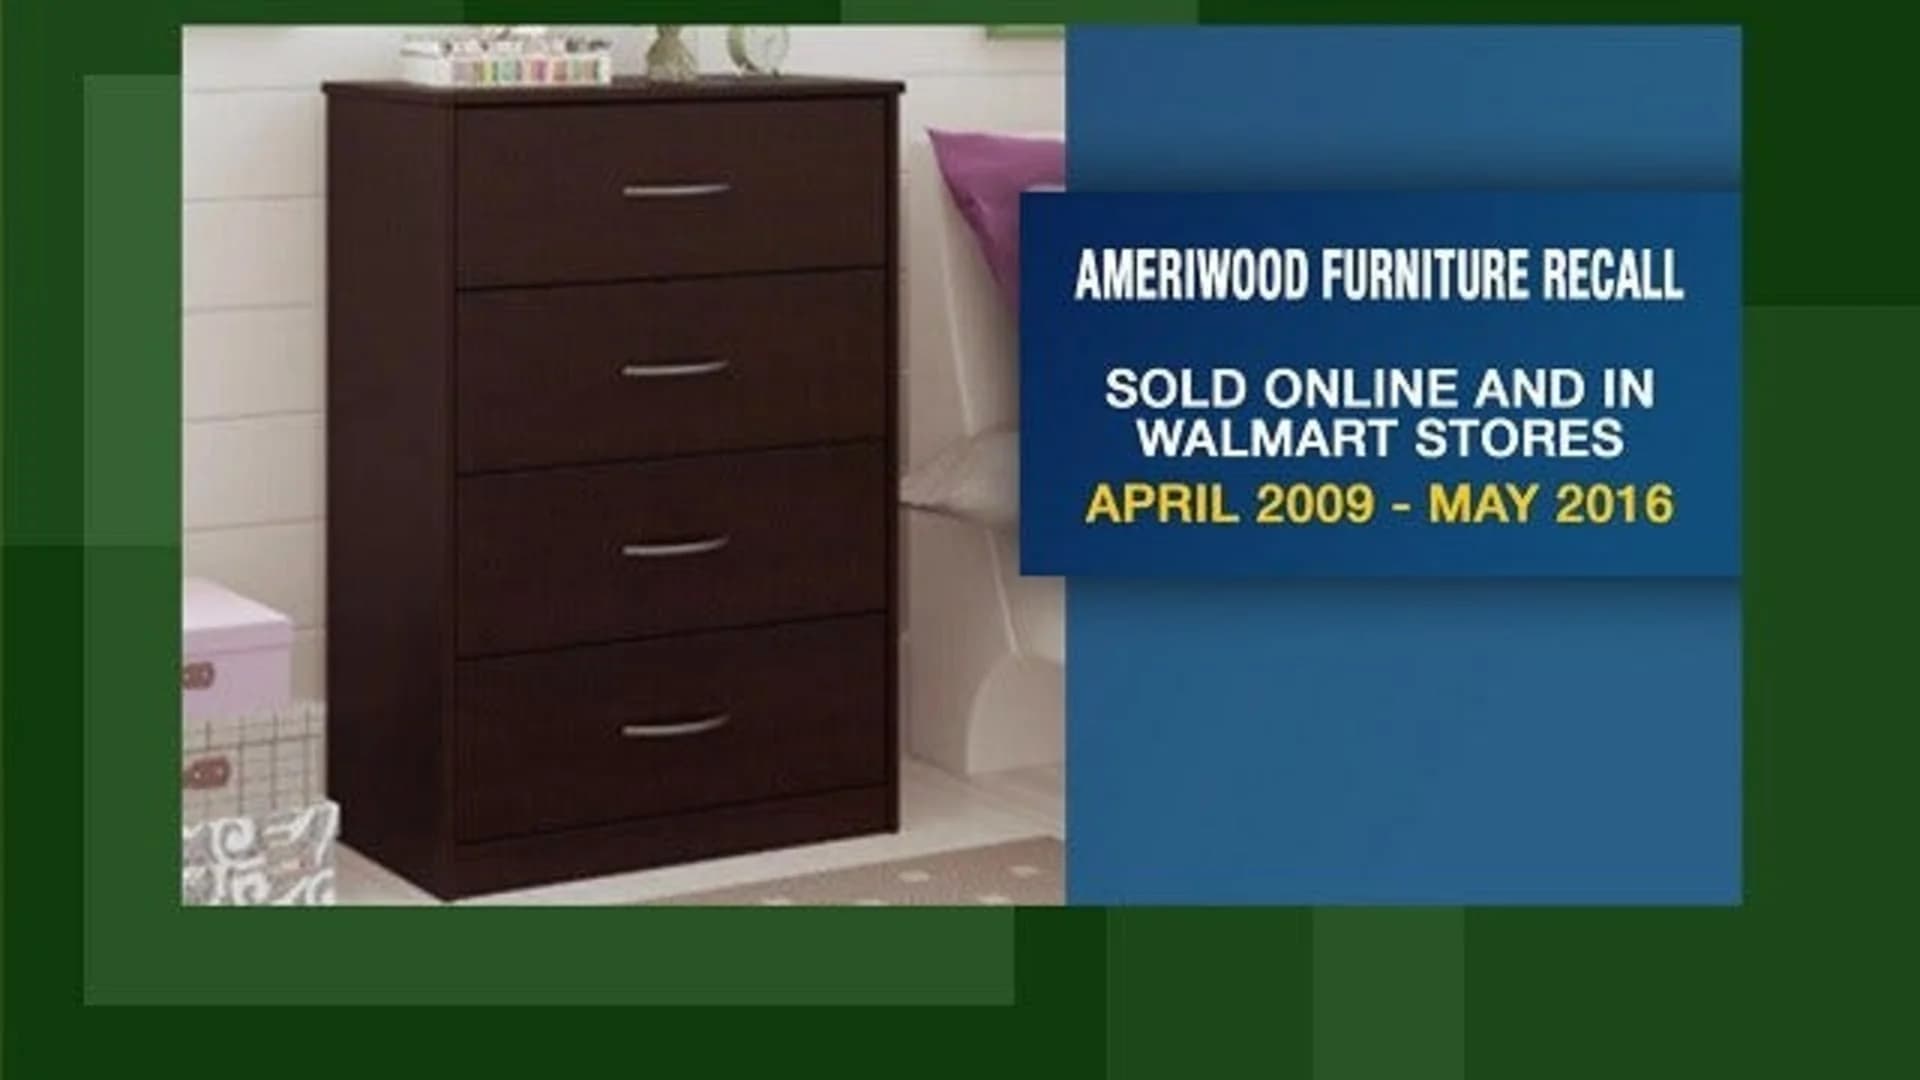 About 1.6M wooden chests sold at Walmart recalled